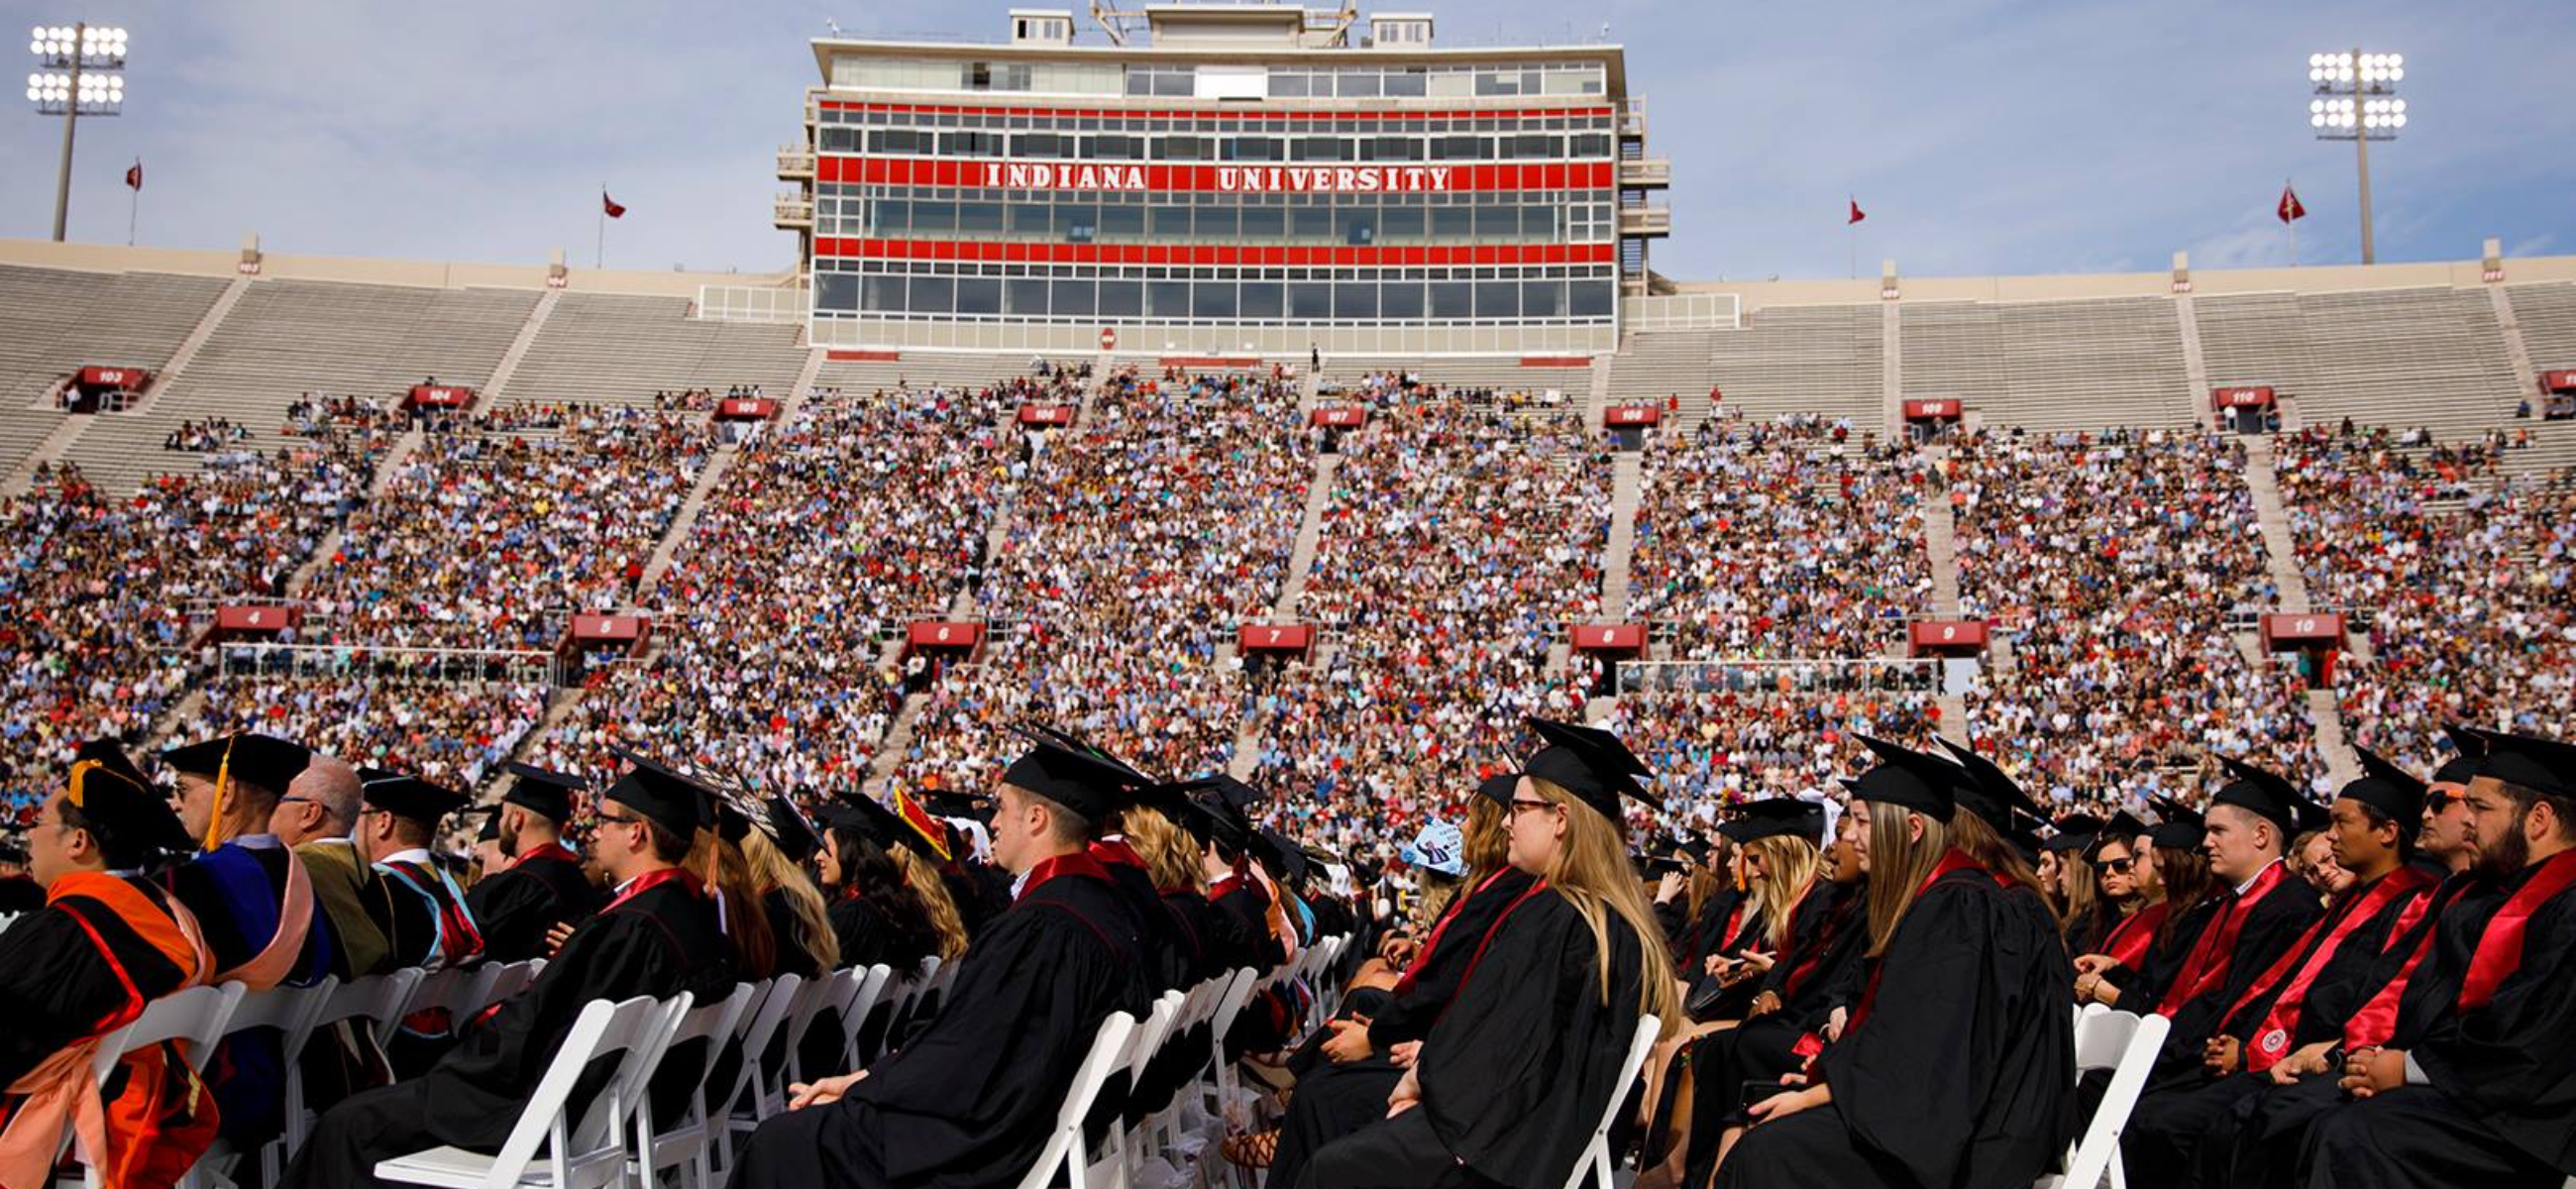 Students participate in a graduation ceremony at Indiana University. (Credit: Indiana University)